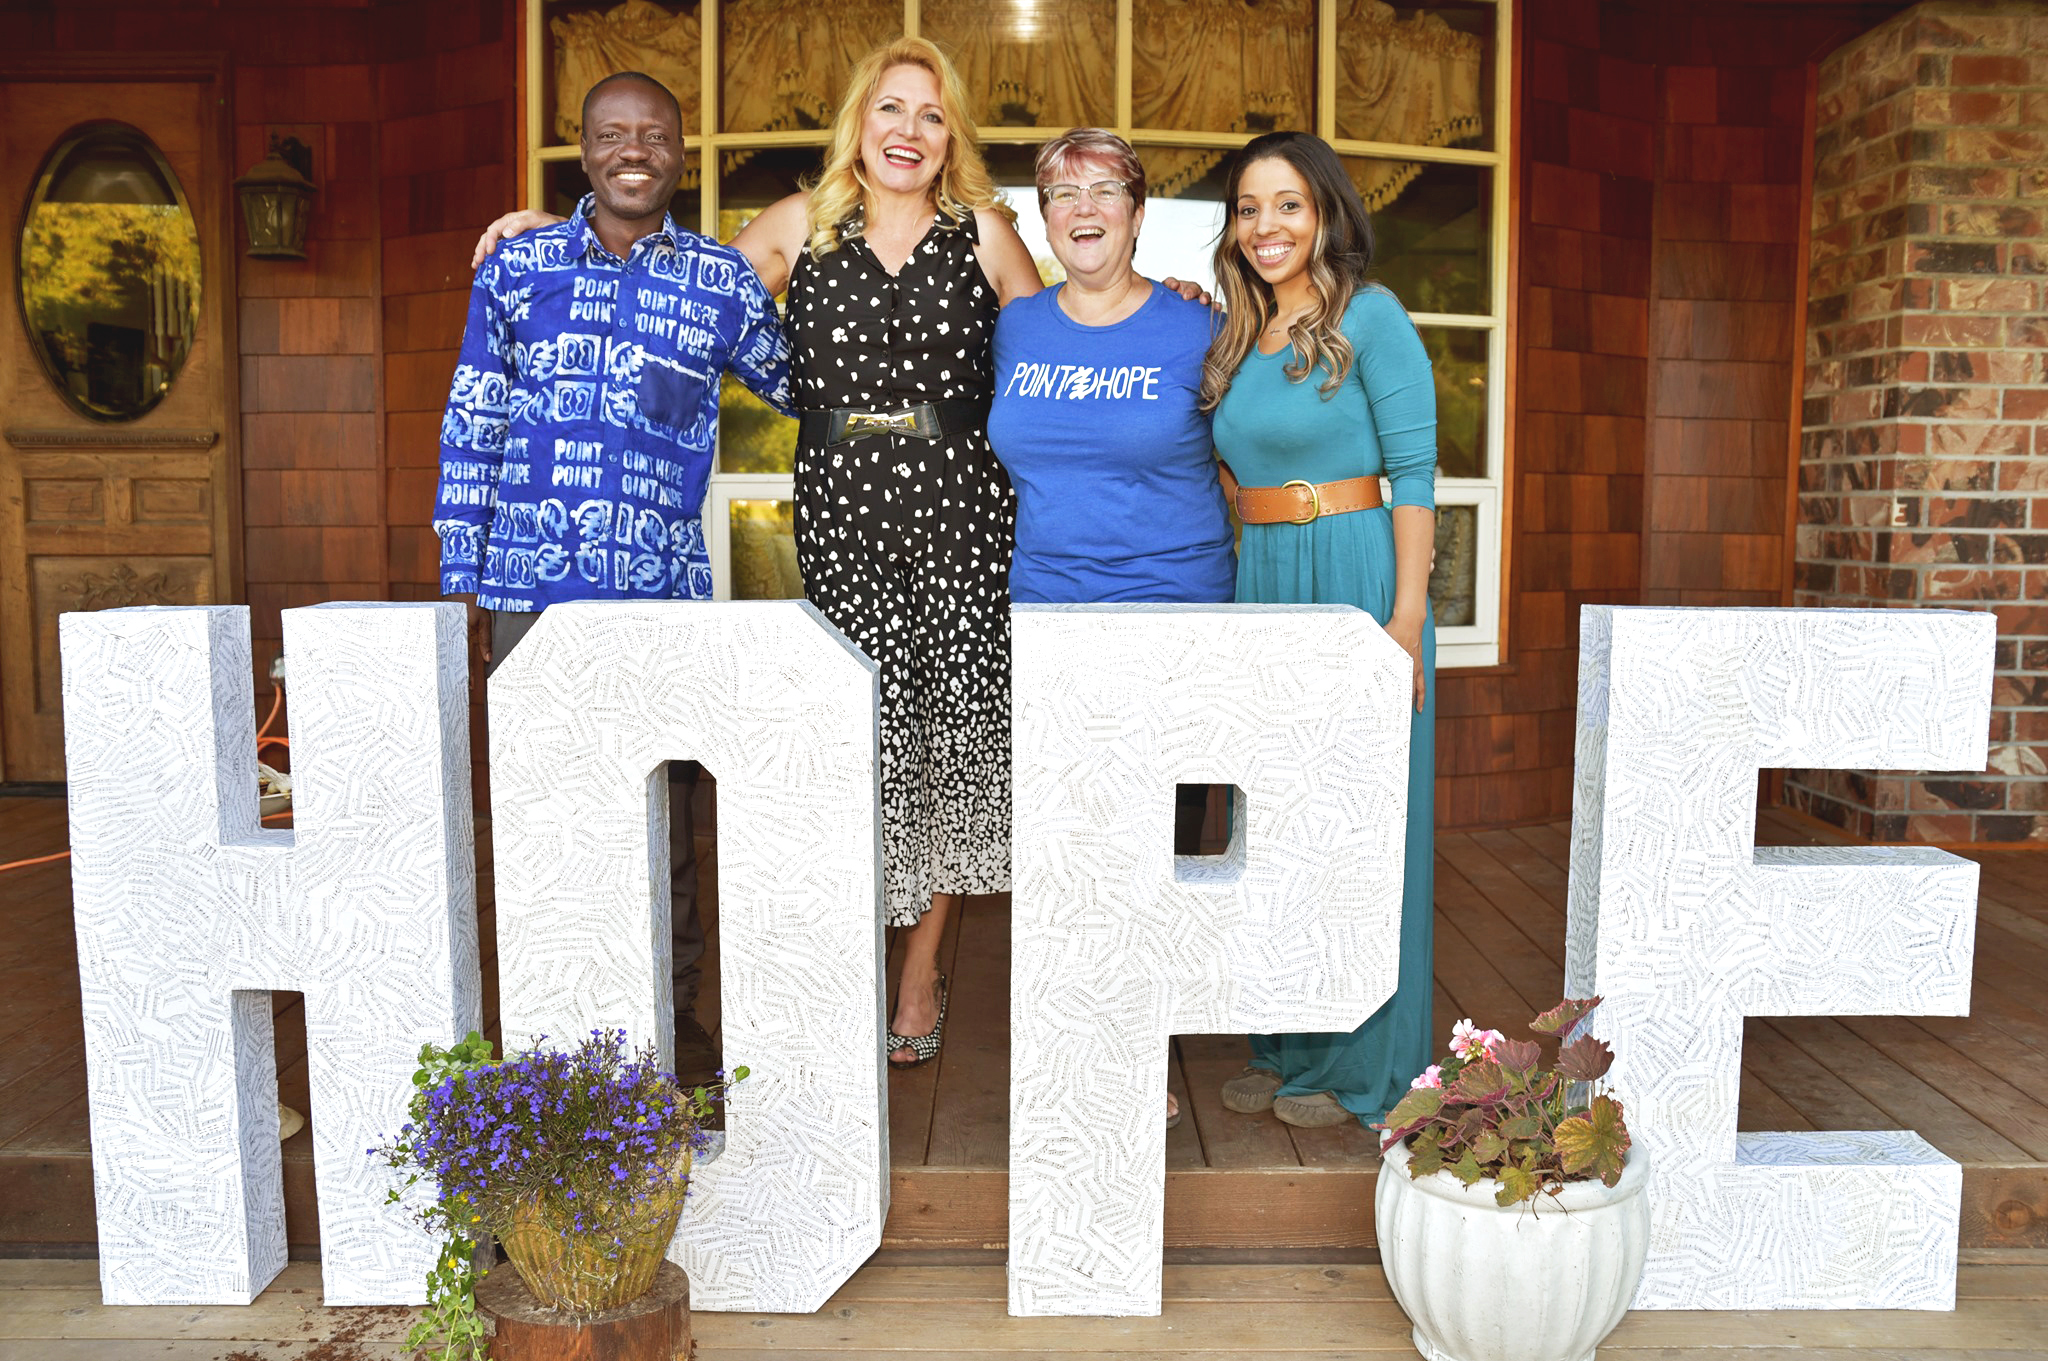  L-R: Adam Sandow (Point Hope Ghana In-Country Director,) Delilah (Founder of Point Hope,) Jan Haynes (Point Hope Executive Director,) Erin Haynes-Briggs (Point Hope Office Manager and Domestic Programs Coordinator)   Photo by Ron Finney / courtesy o